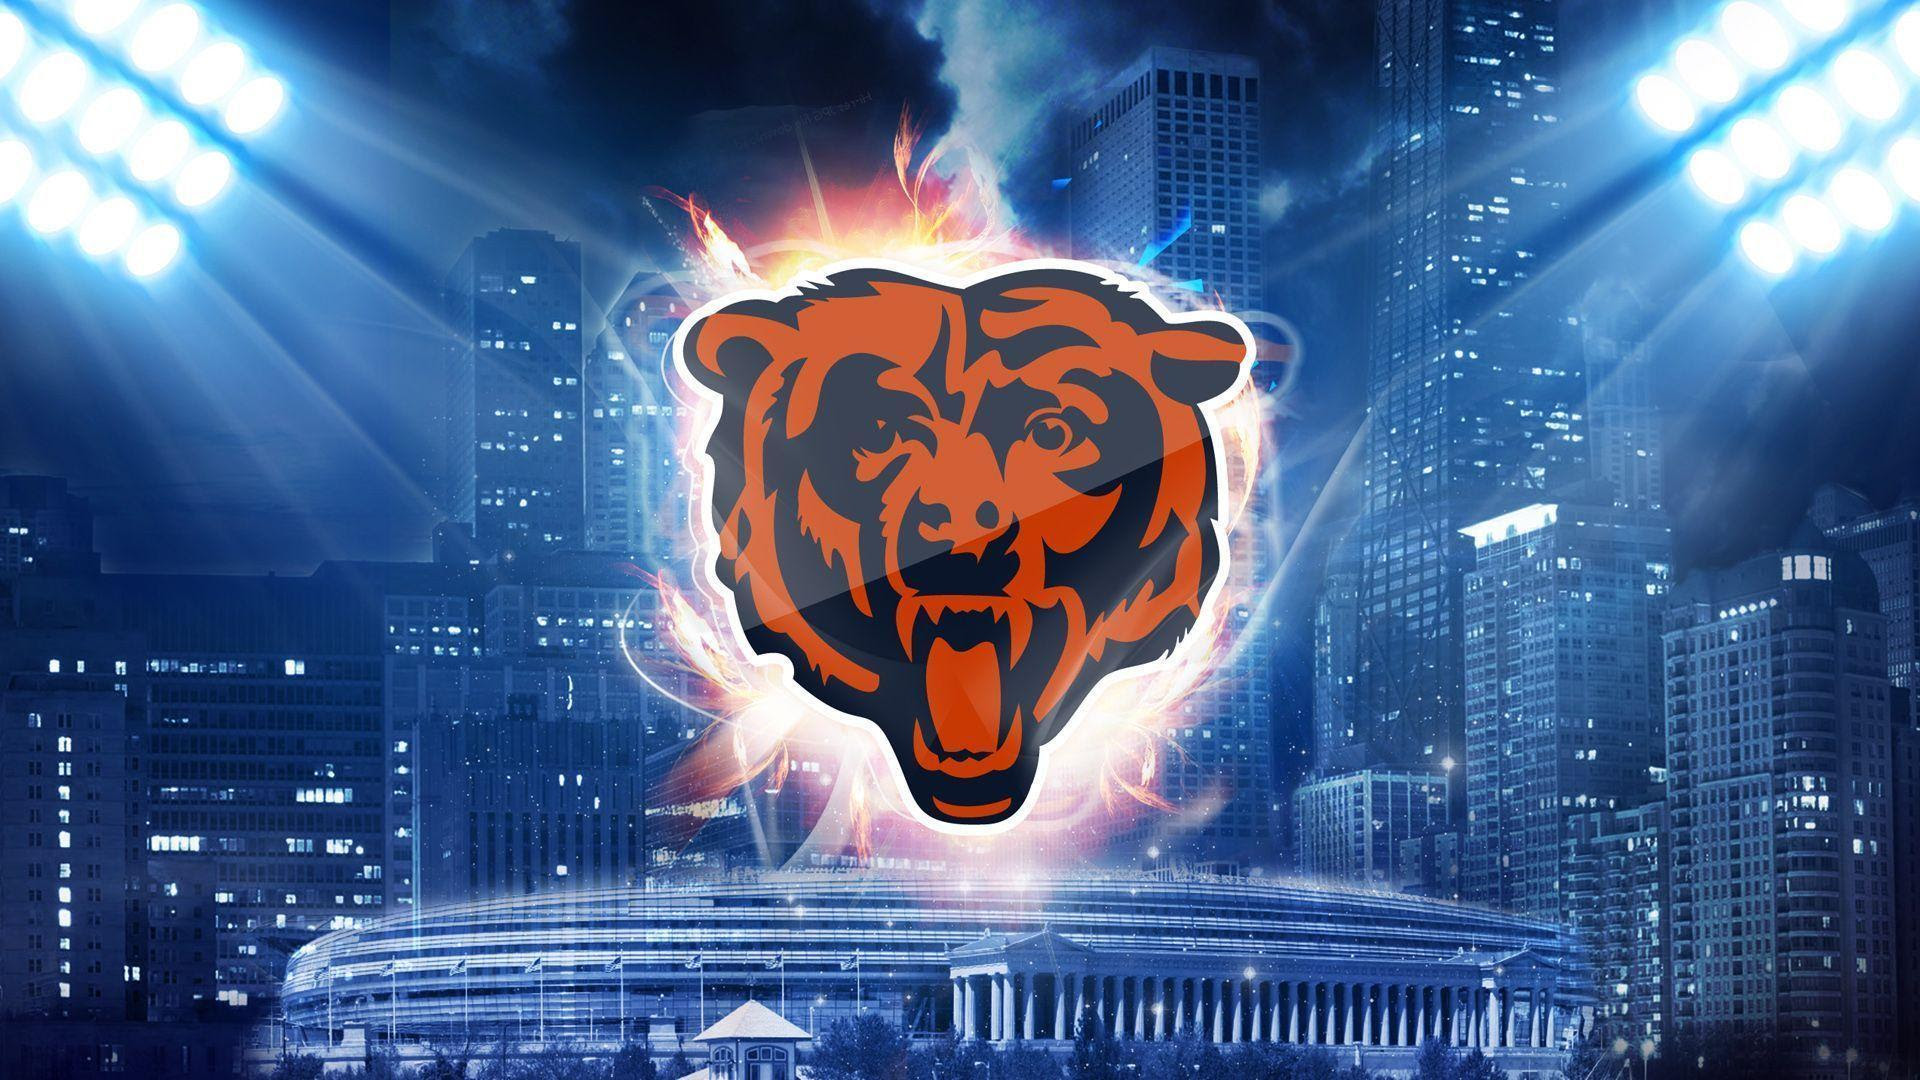 Chicago Bears Wallpapers 2015 - Wallpaper Cave